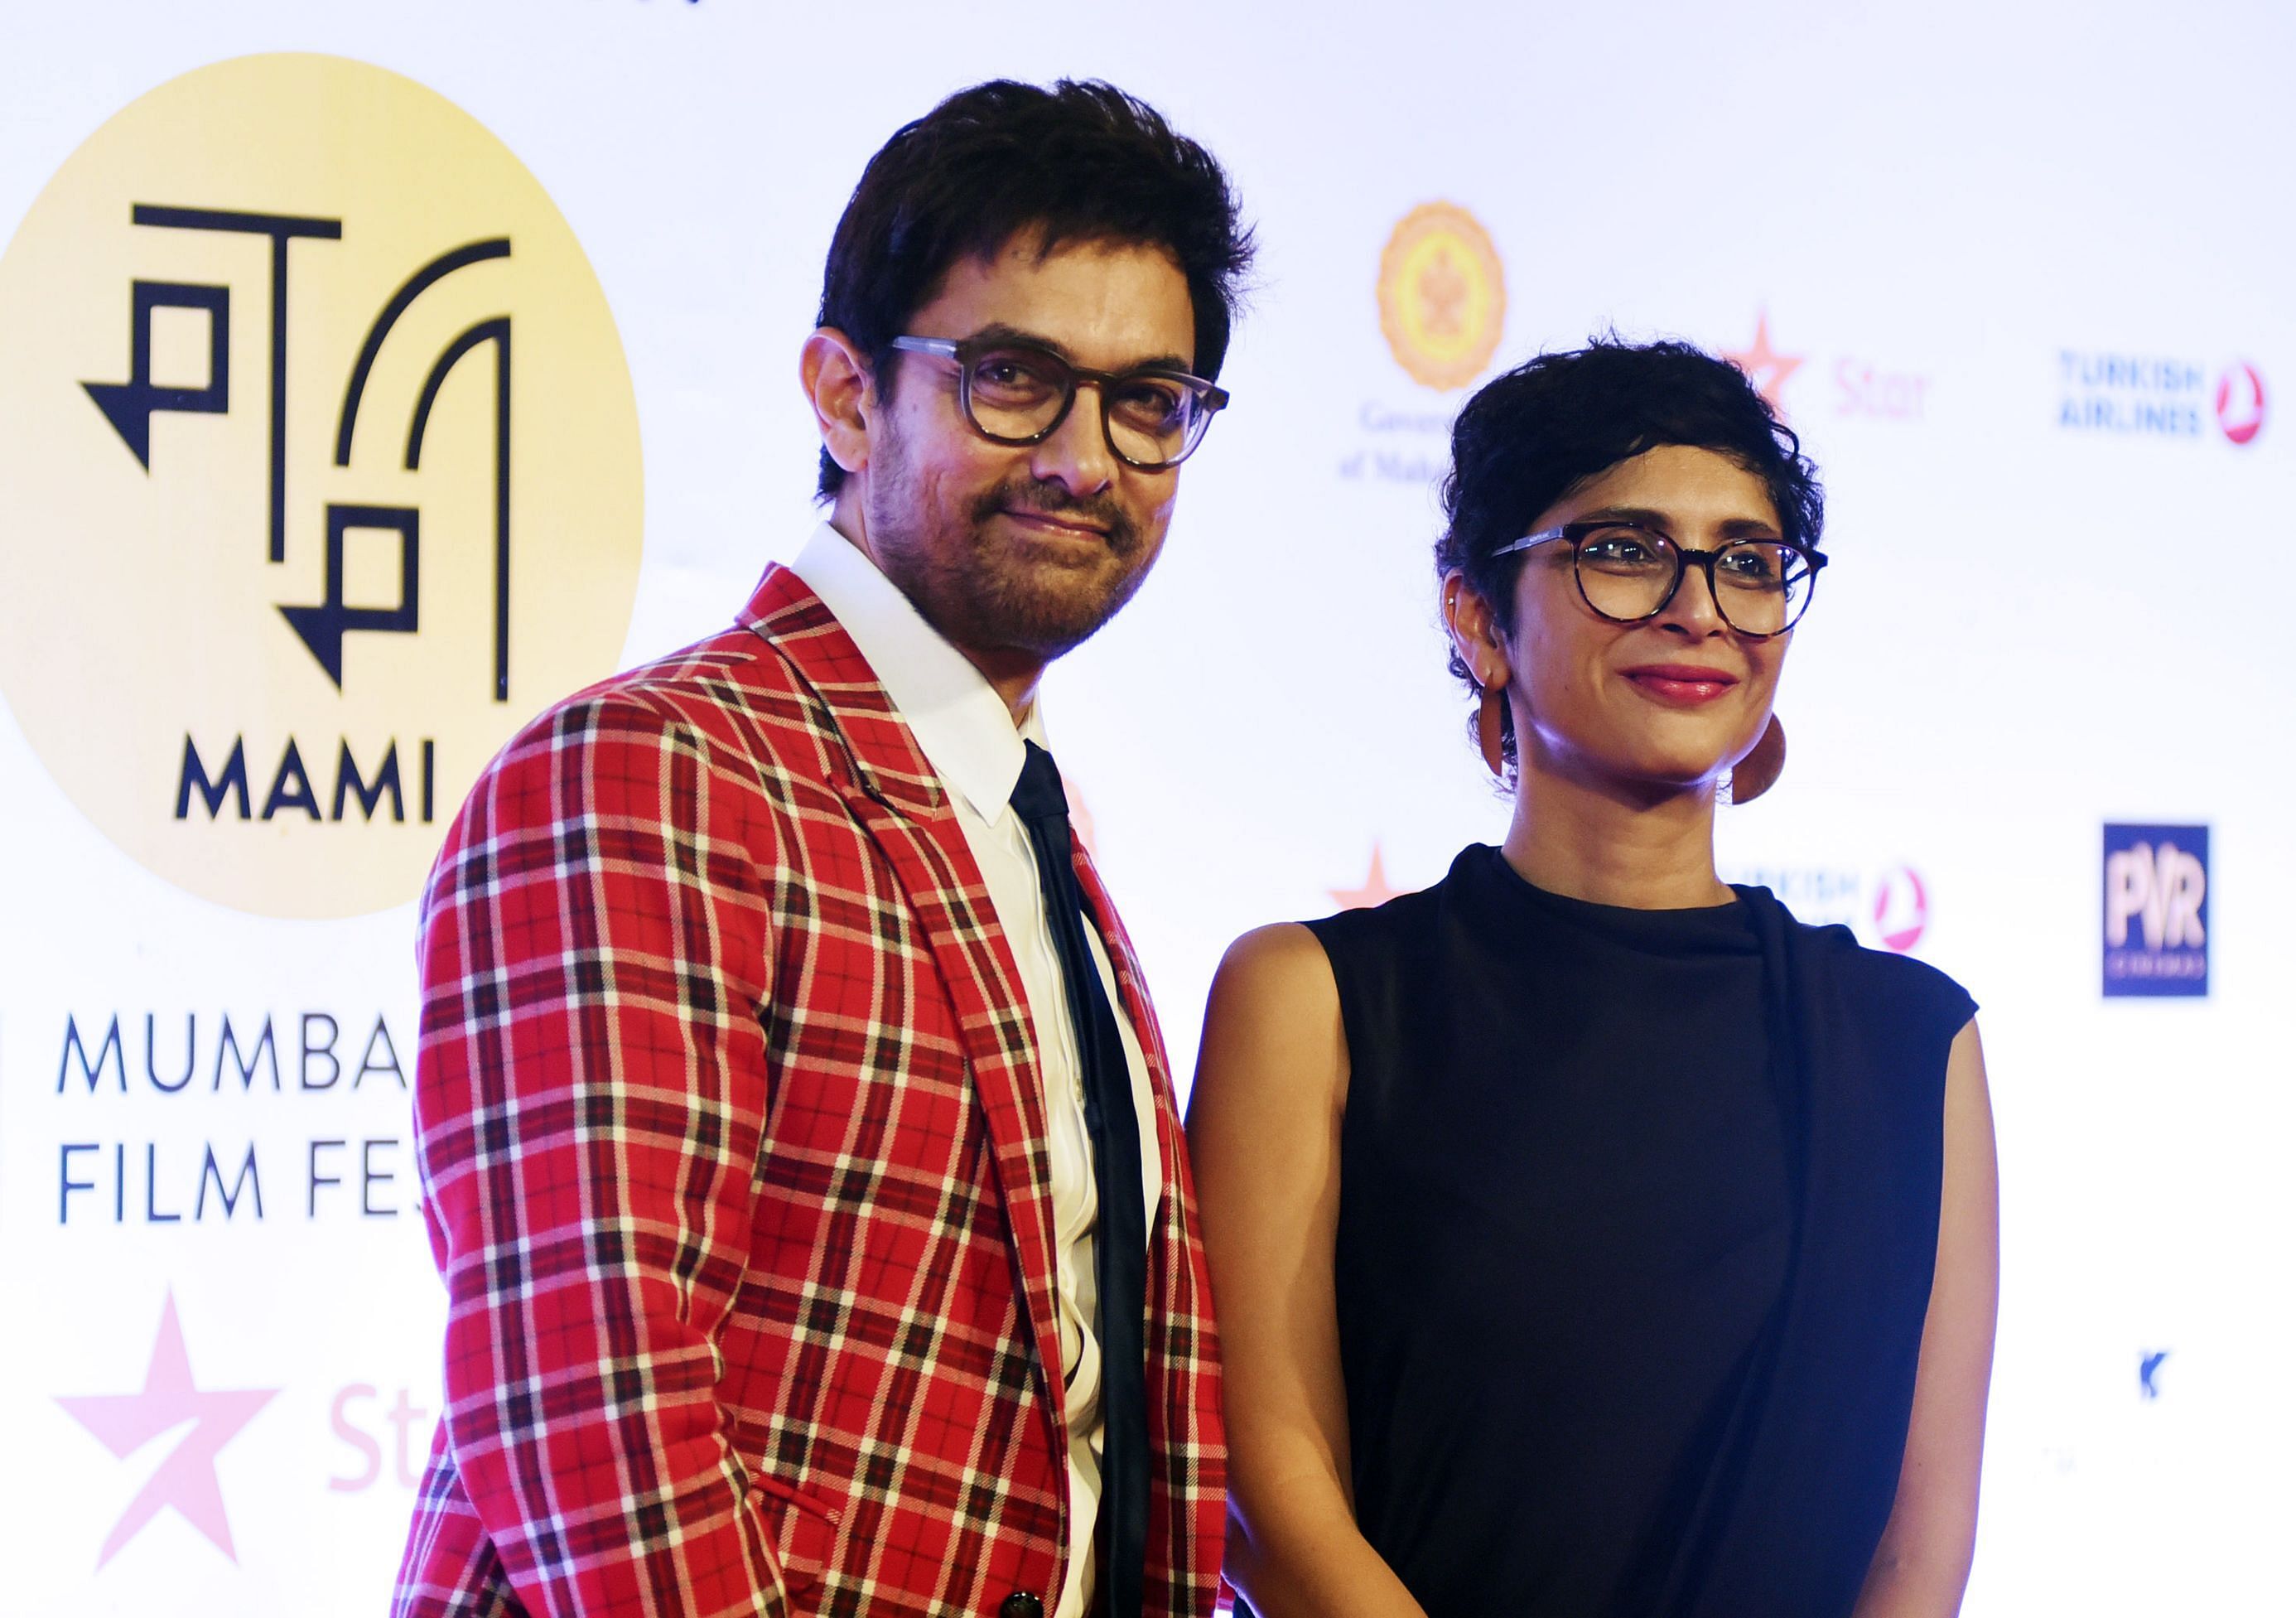 Bollywood star Aamir Khan has parted ways with his wife and filmmaker Kiran Rao. Credit: AFP Photo